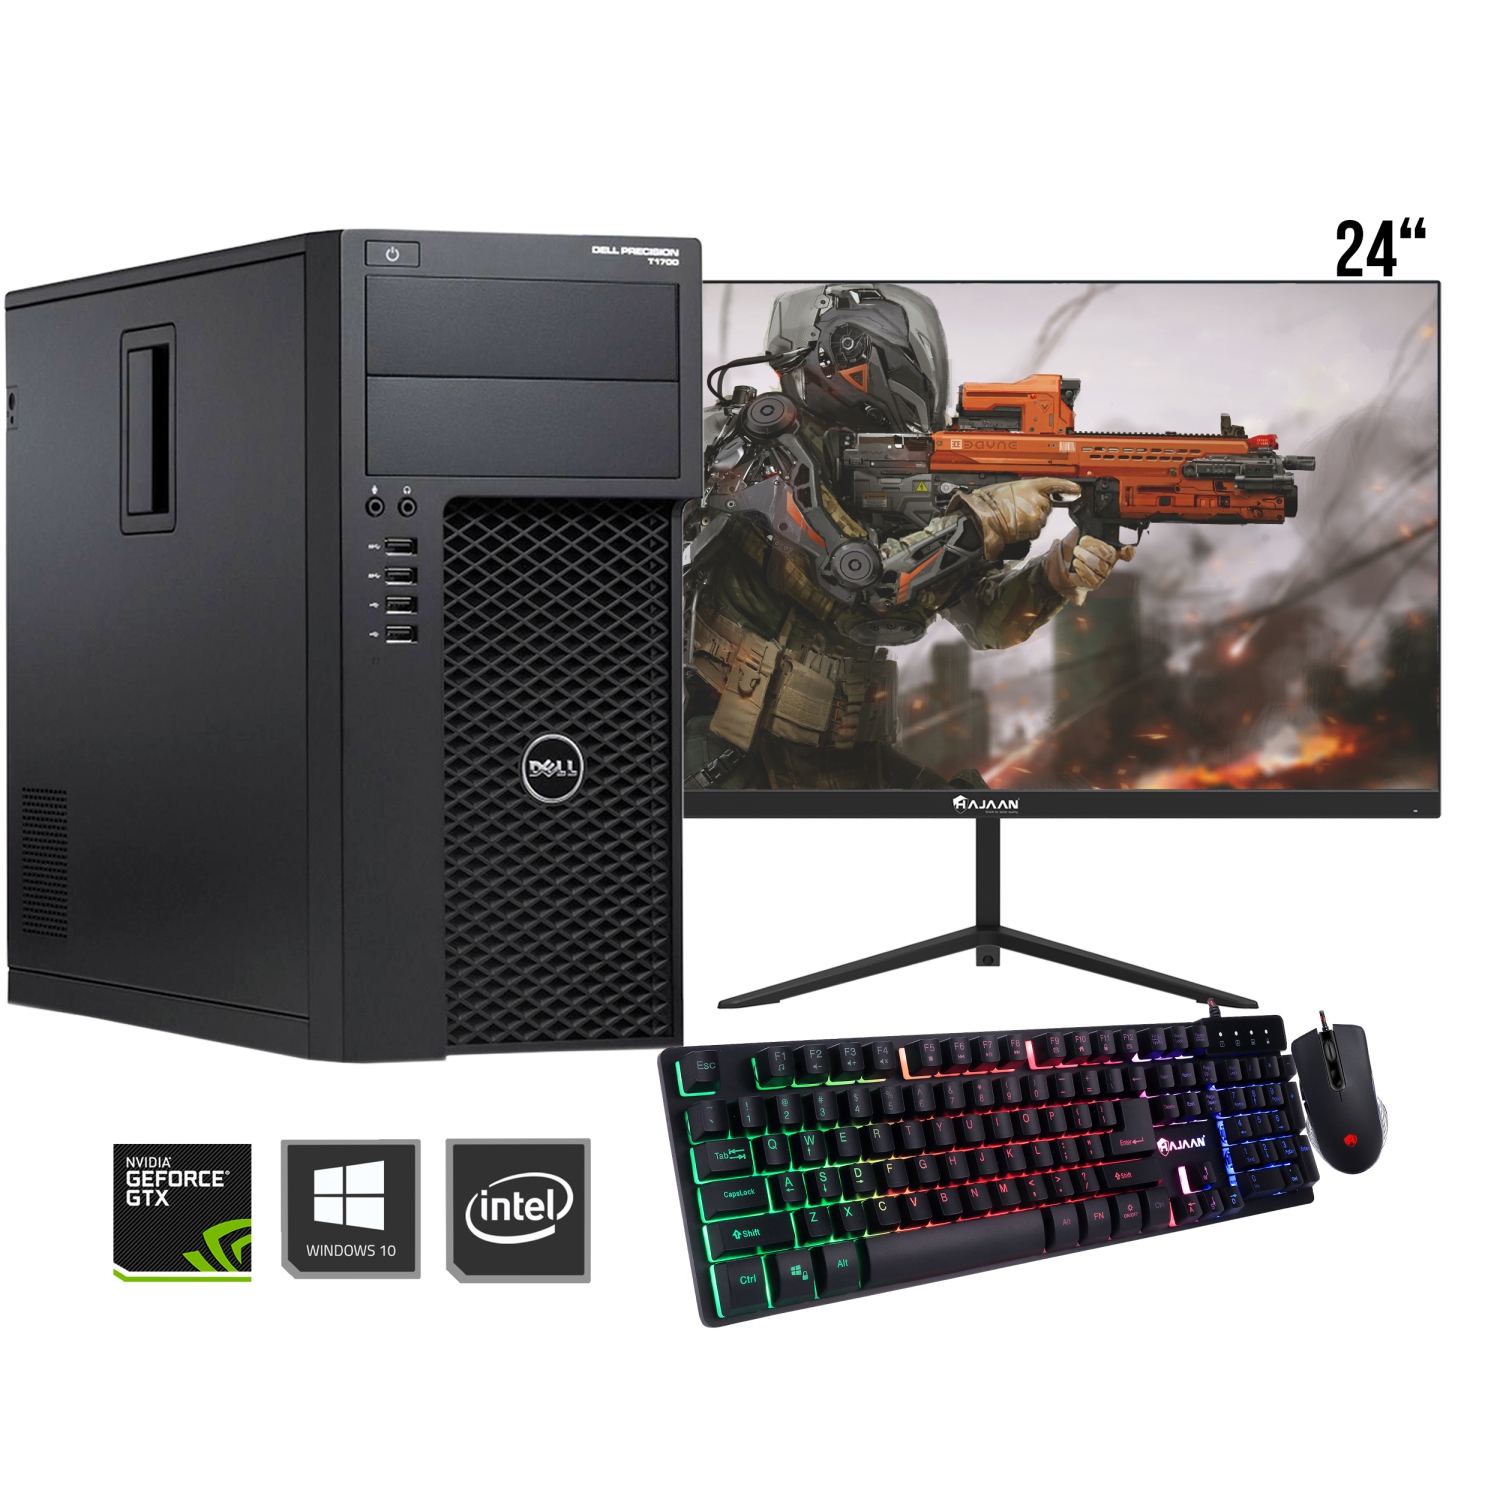 Refurbished (Good) - Dell Precision T1700 Gaming Tower Workstation with Hajaan 24" Monitor - Intel Core i7-4770, 3.40 GHz 32GB RAM 1TB SSD Windows 10 Home, NVIDIA GTX 1650 4GB